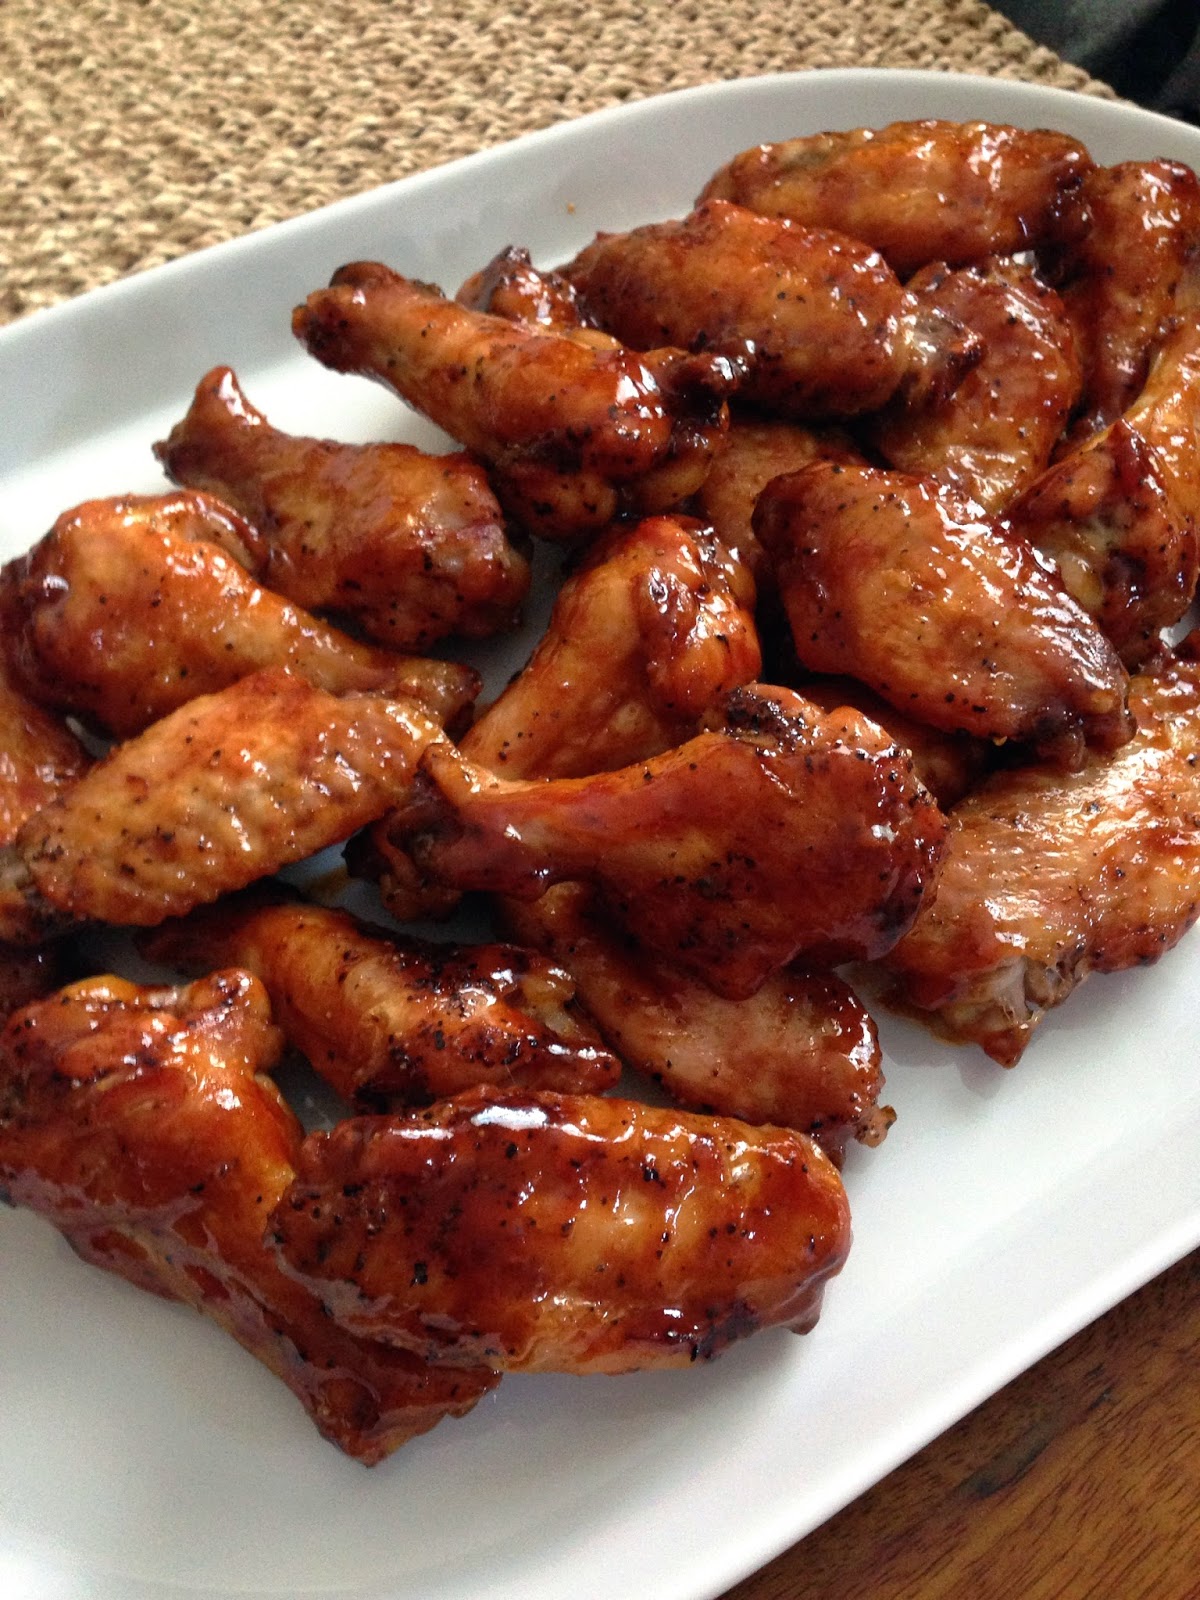 taylor made: the best baked chicken wings